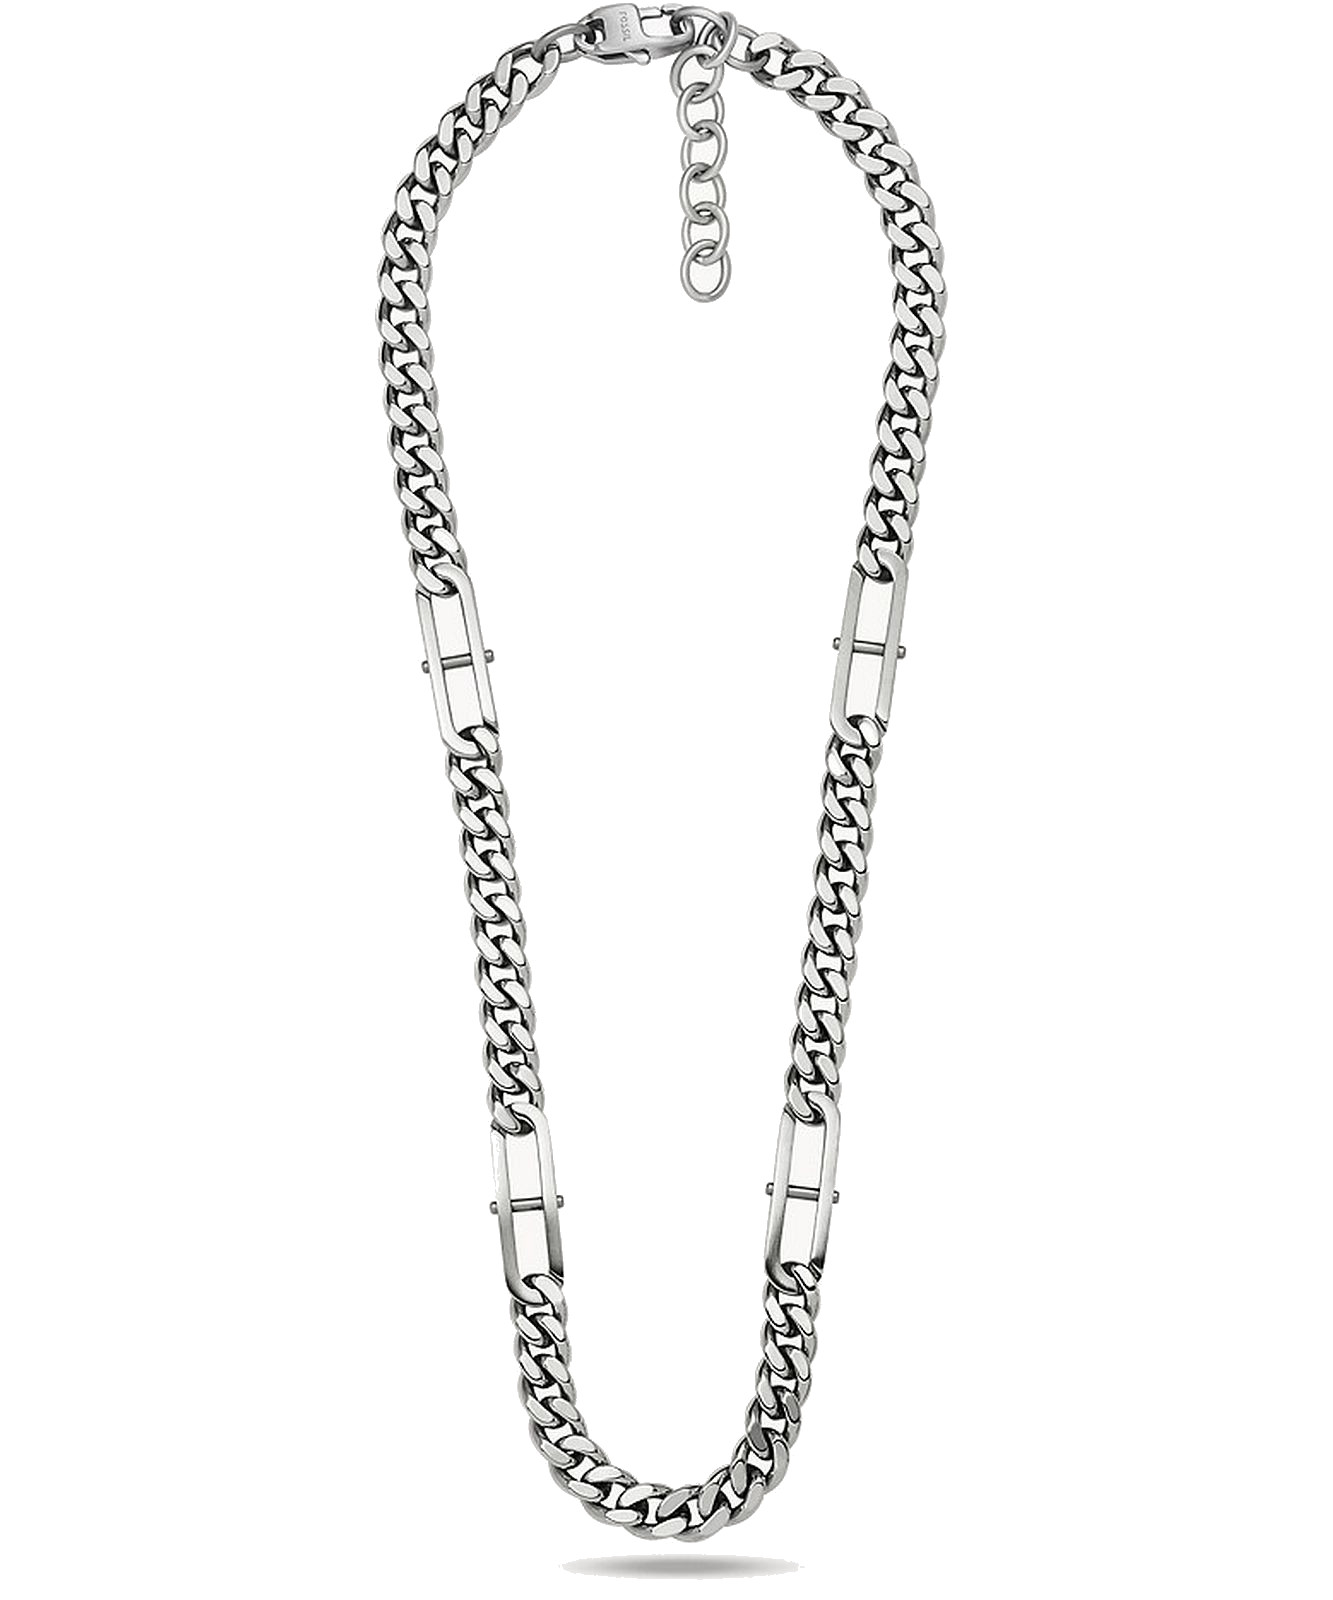 Men's Necklace - JF85832040 - Fossil